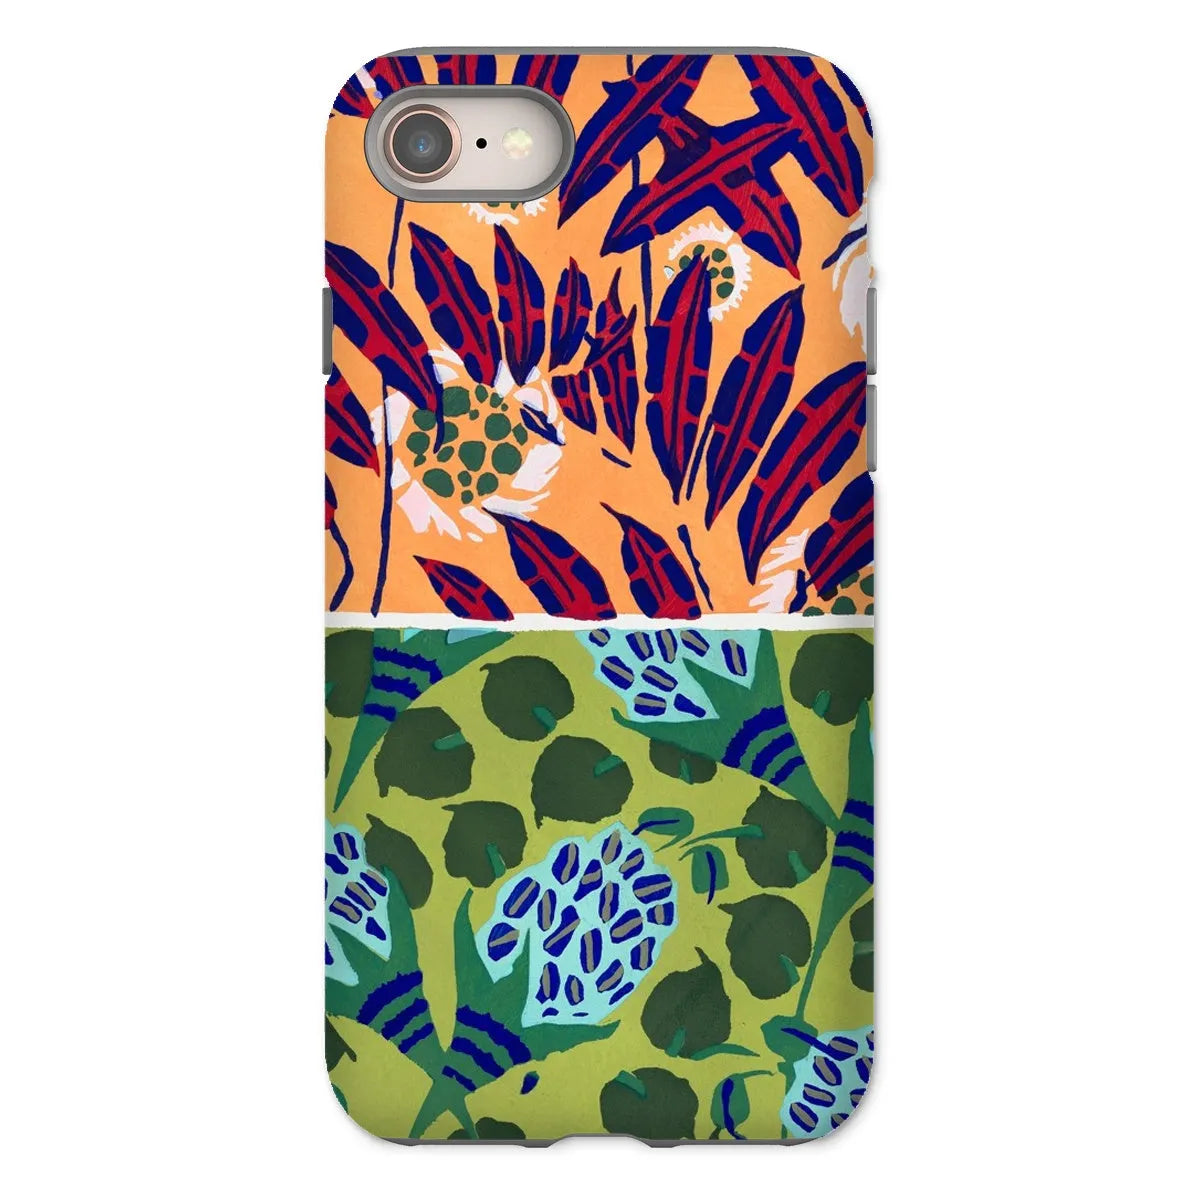 Fabric & Rugs Too - Pochoir Pattern Phone Case - E. A. Séguy - Iphone 8 / Matte - Mobile Phone Cases - Aesthetic Art